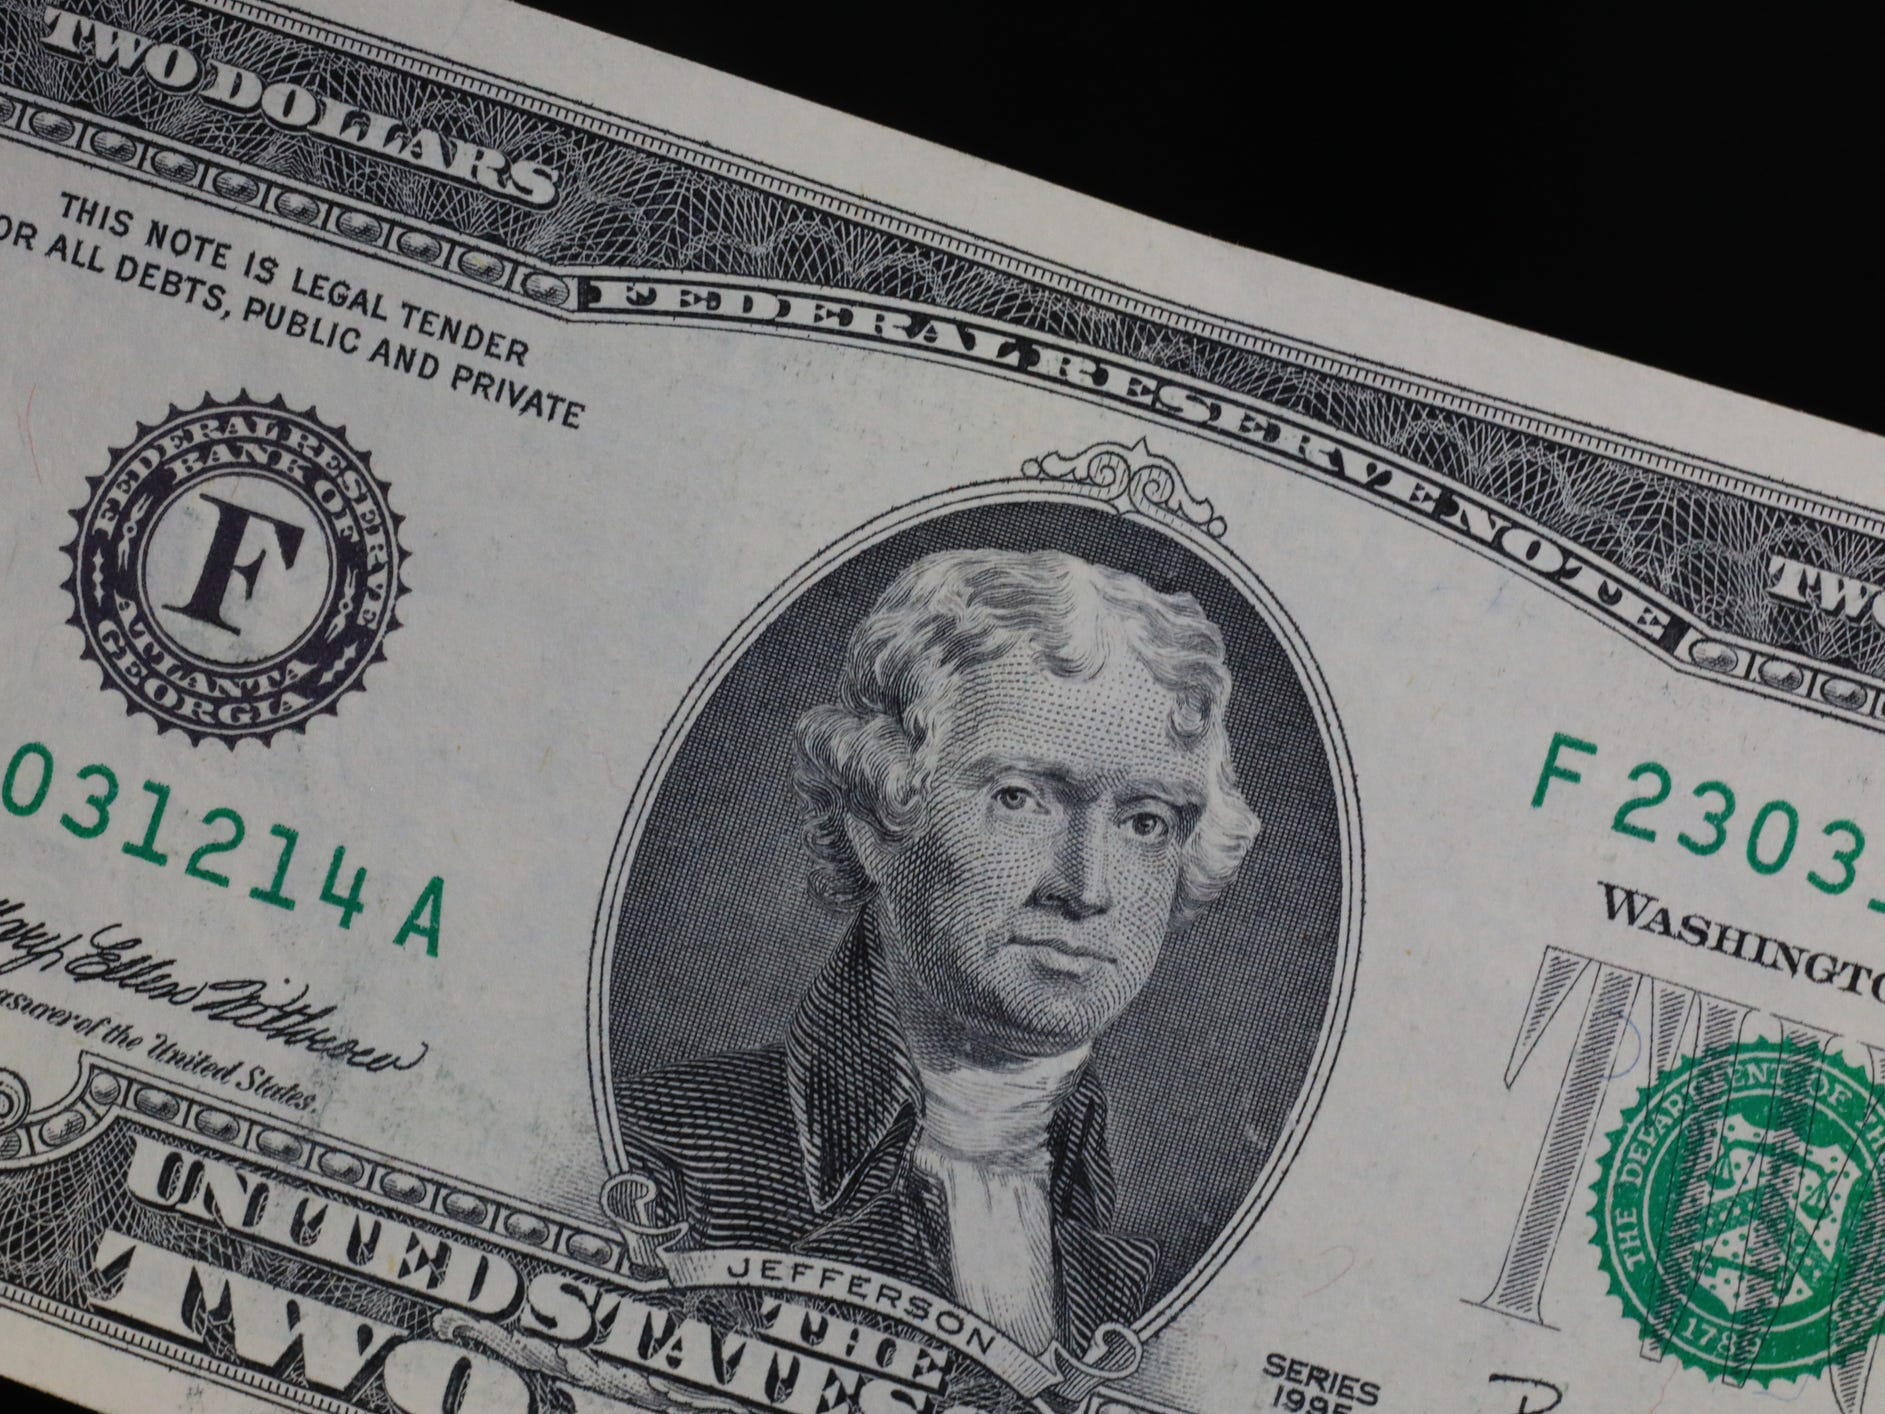 Here's how to tell if your old 2 bills are worth anything